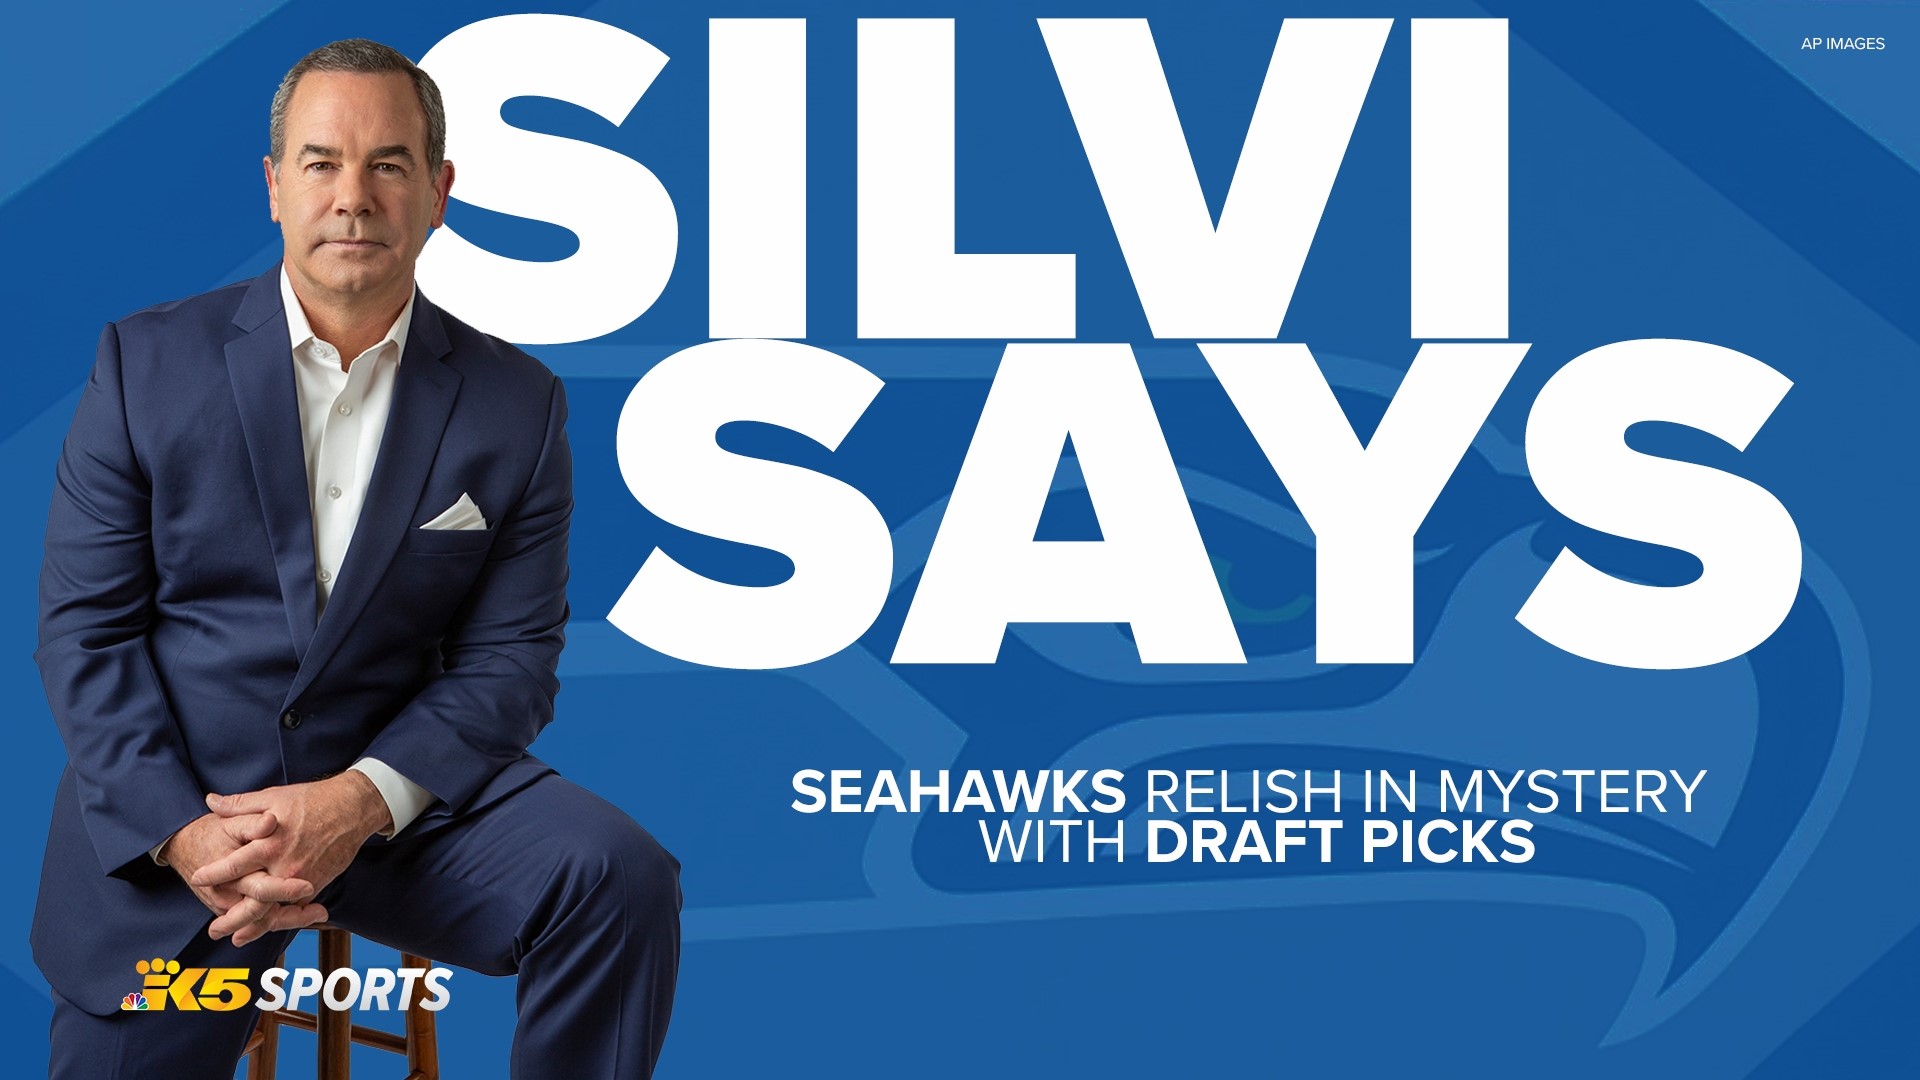 After a full year of mock drafts and speculation, the Seahawks surprised almost everyone in the first round by taking a player hardly anyone linked to the Seahawks.